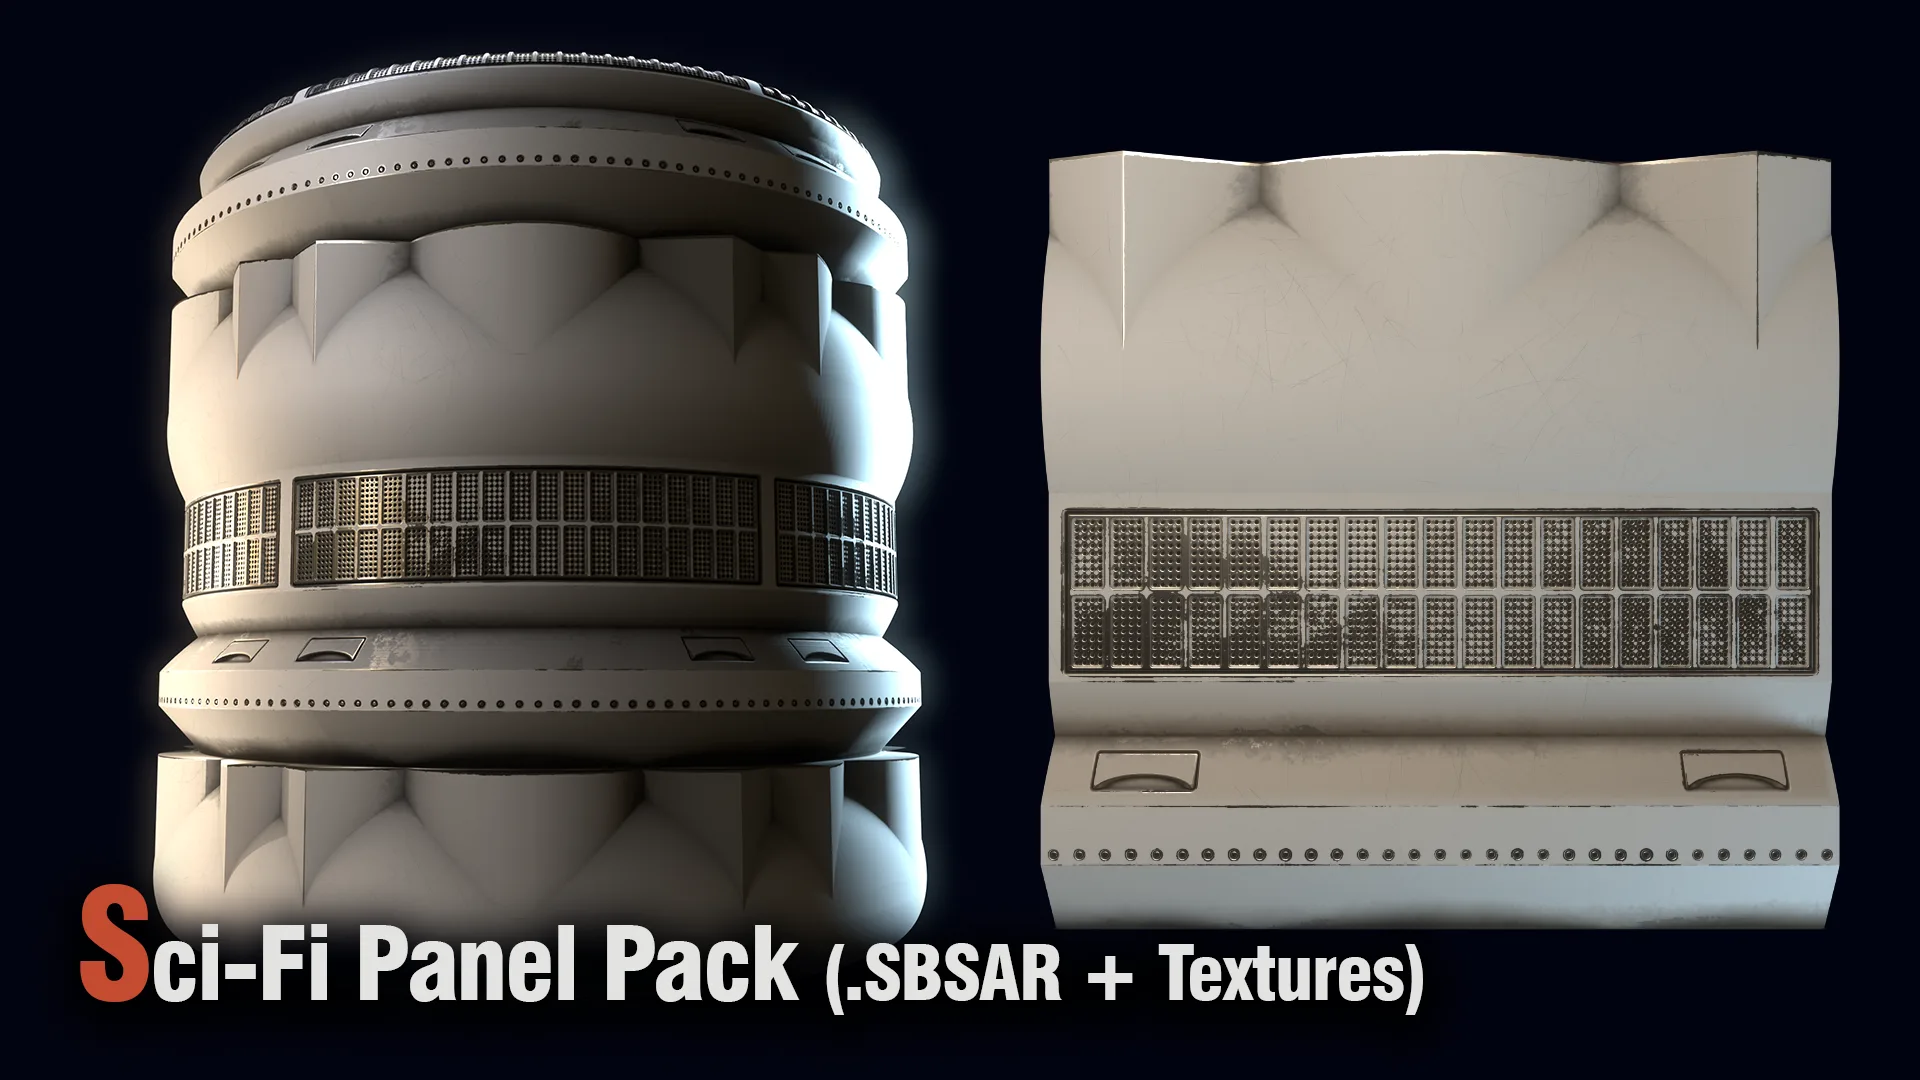 Sci-Fi Panel Pack (,SBSAR + Textures)